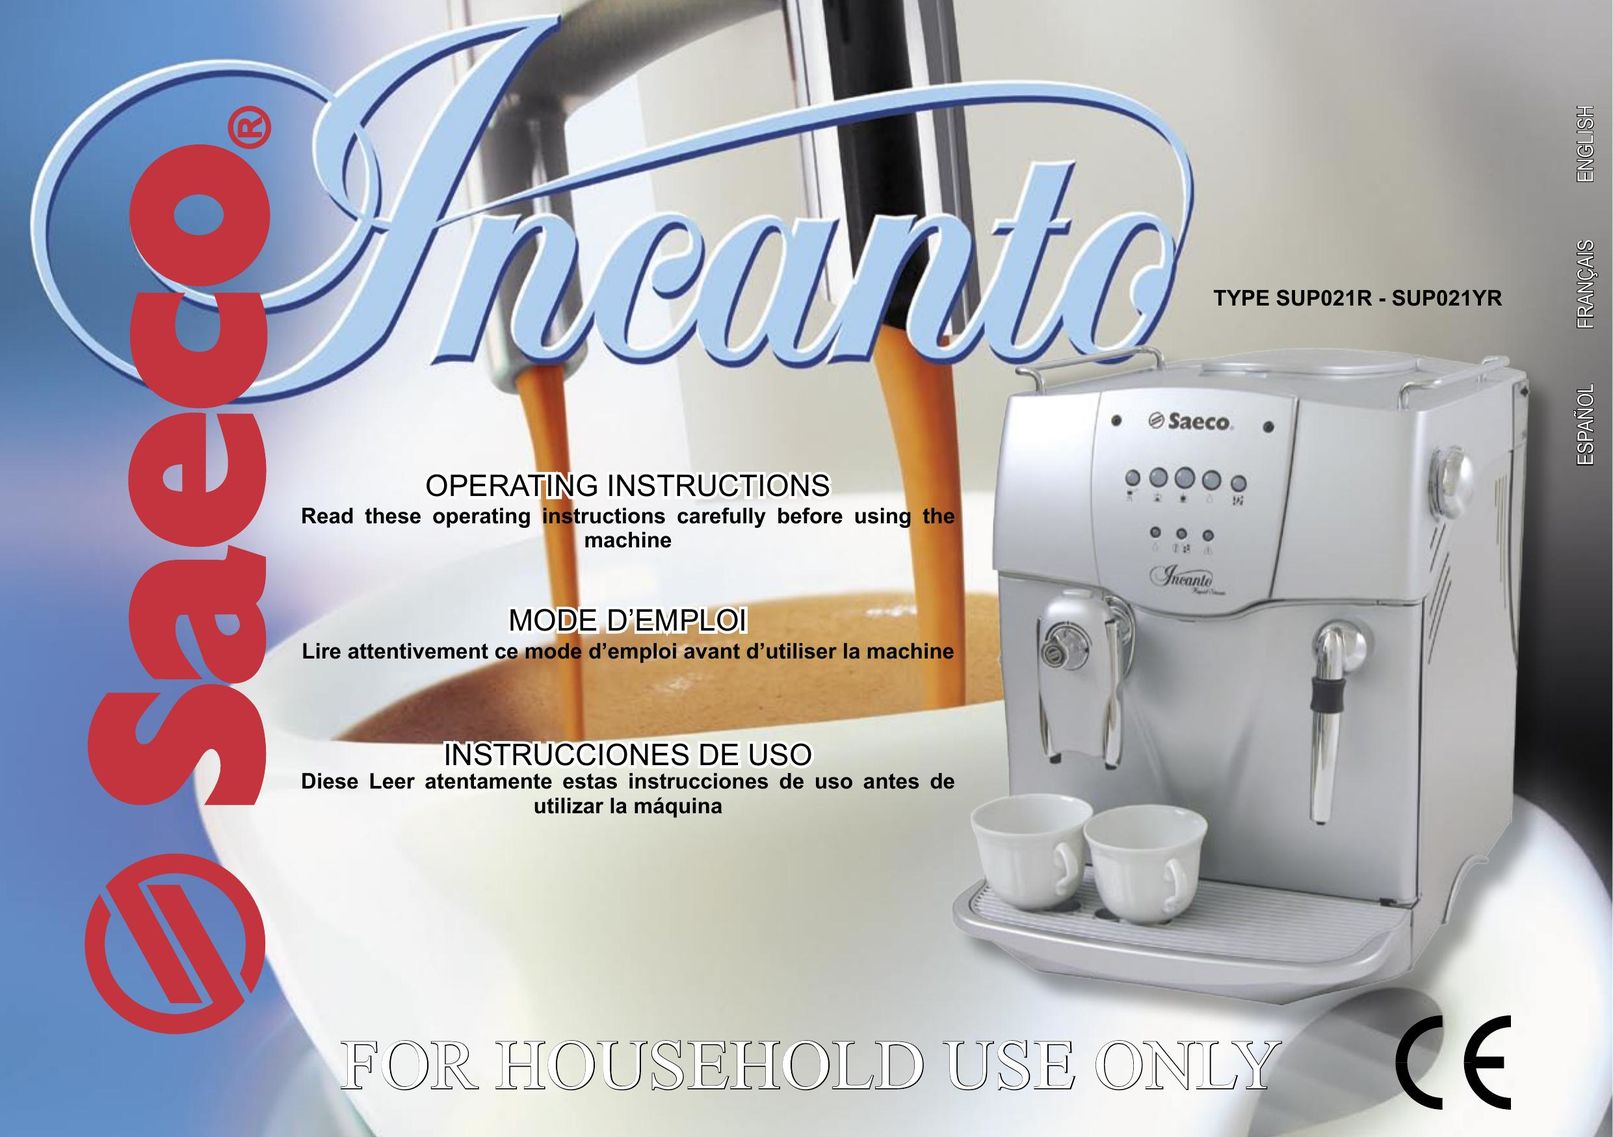 Saeco Coffee Makers SUP021YR Network Hardware User Manual